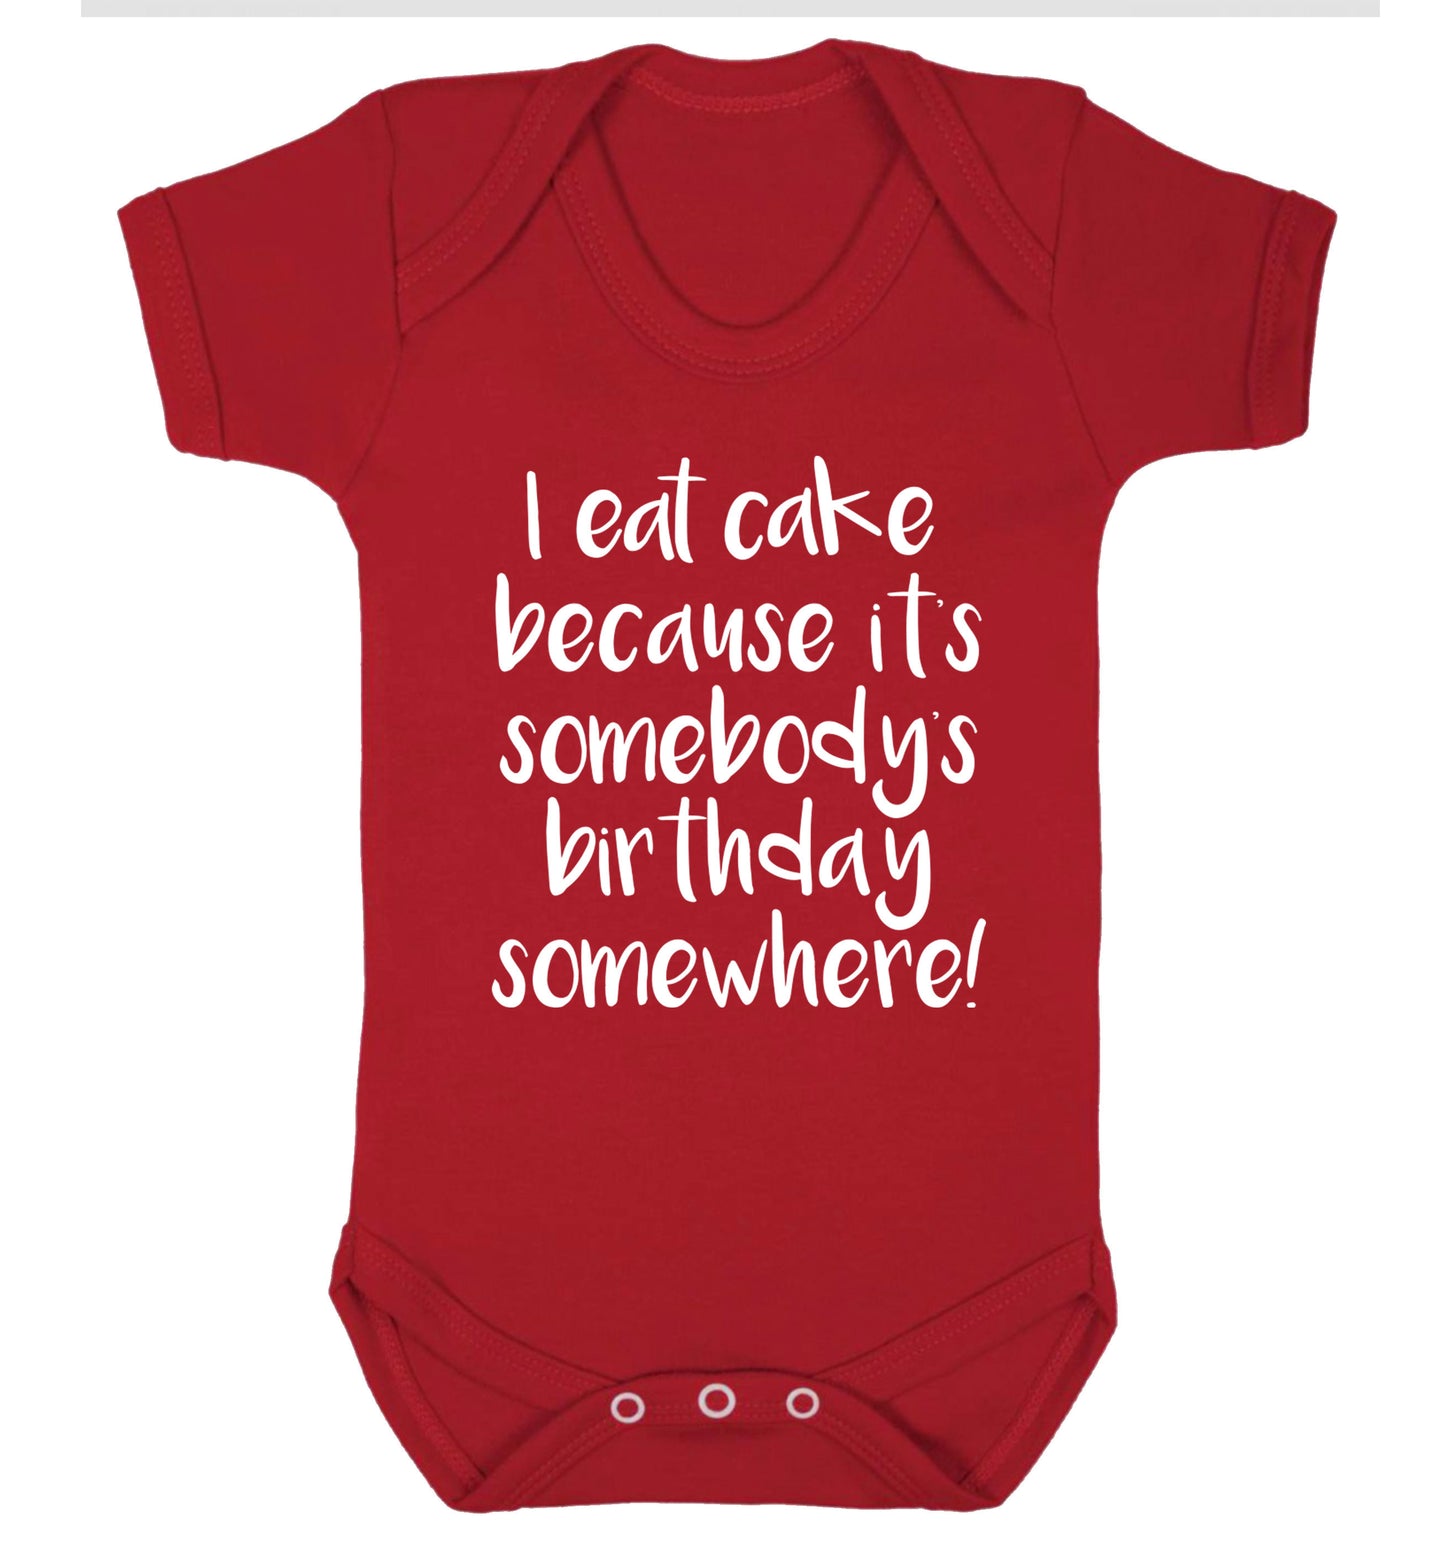 I eat cake because it's somebody's birthday somewhere! Baby Vest red 18-24 months